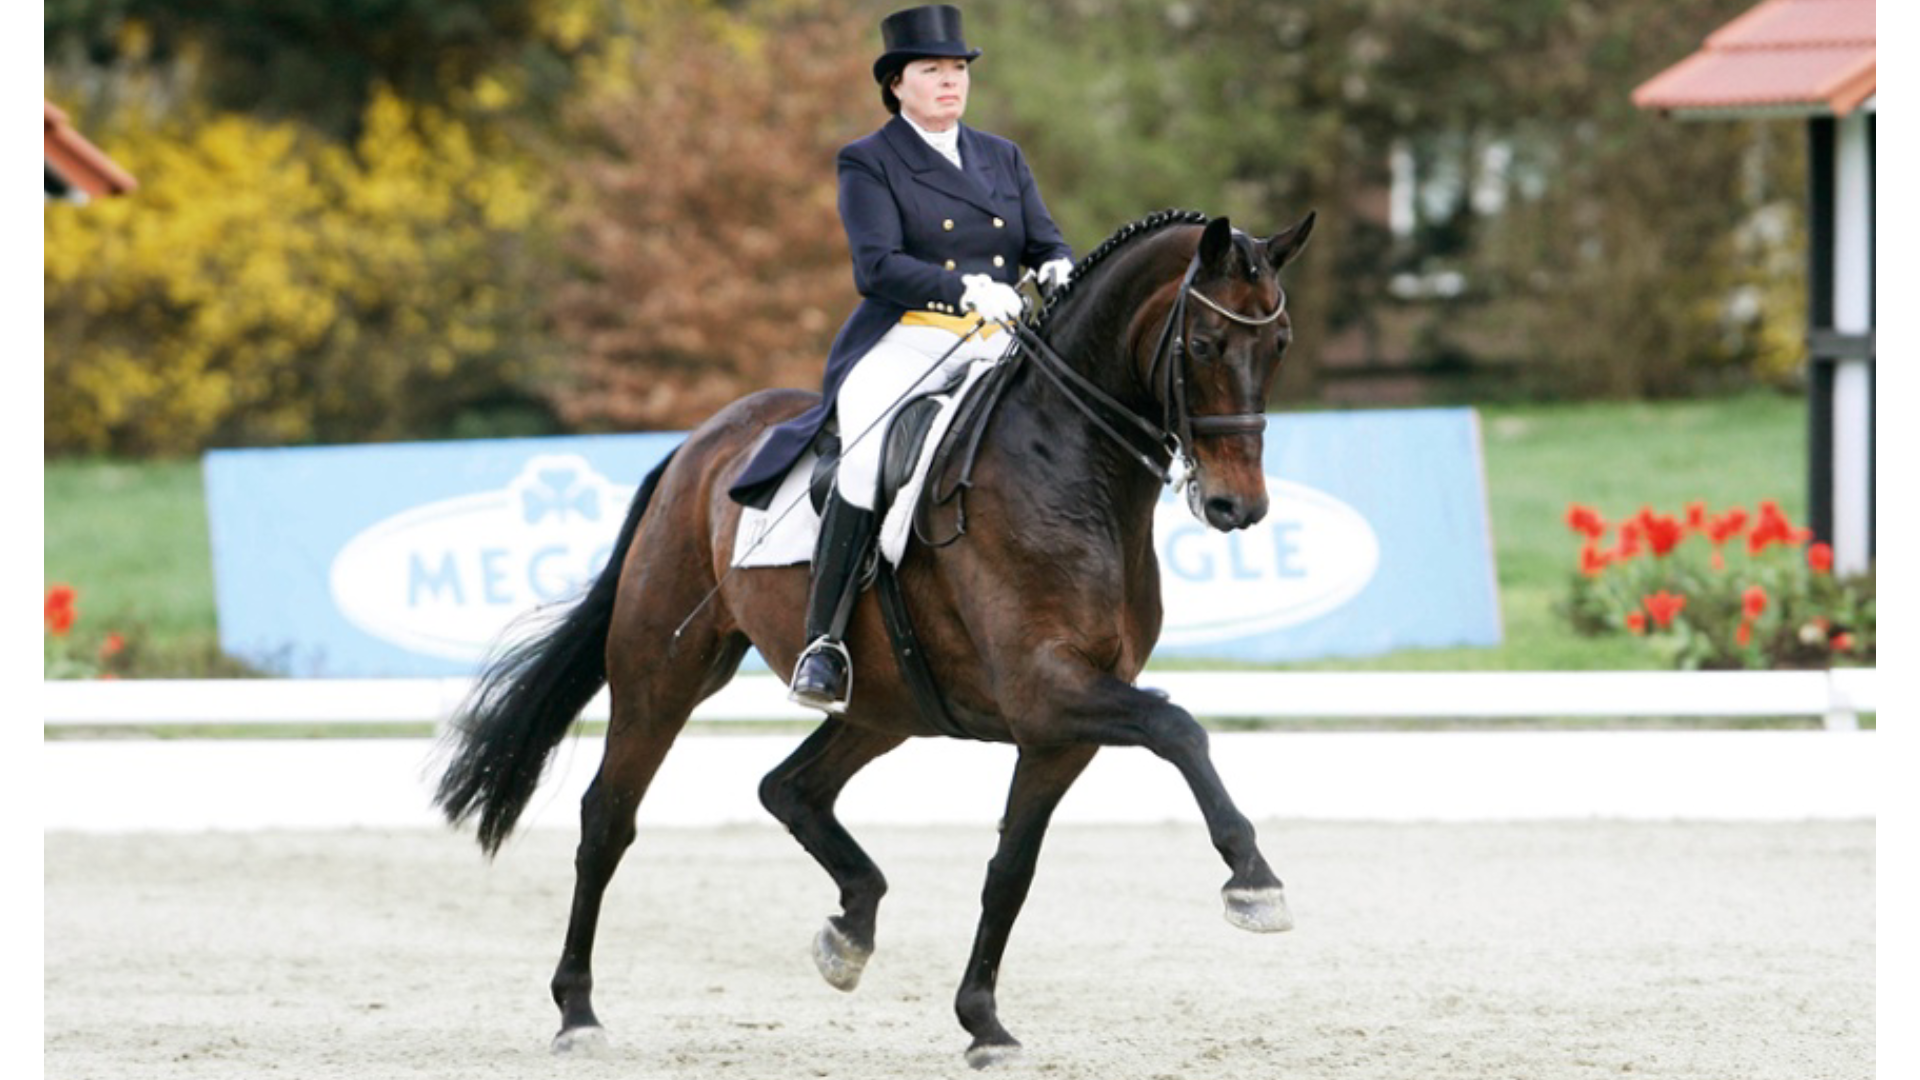 Horse and rider performing a dressage test